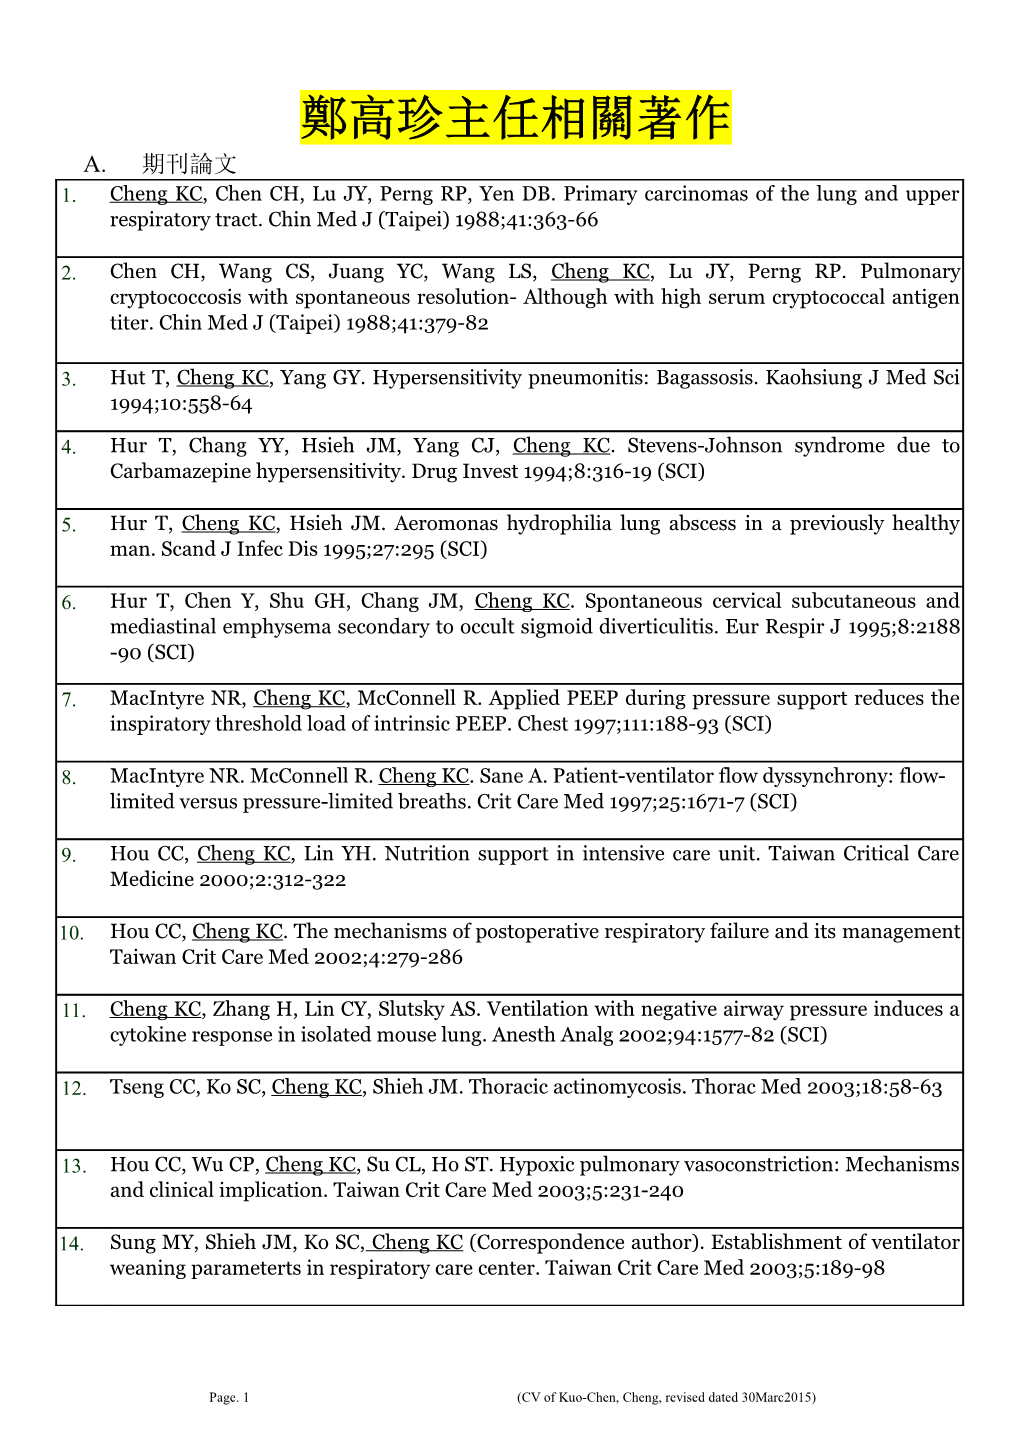 Page. 1 (CV of Kuo-Chen,Cheng, Revised Dated 30Marc2015)